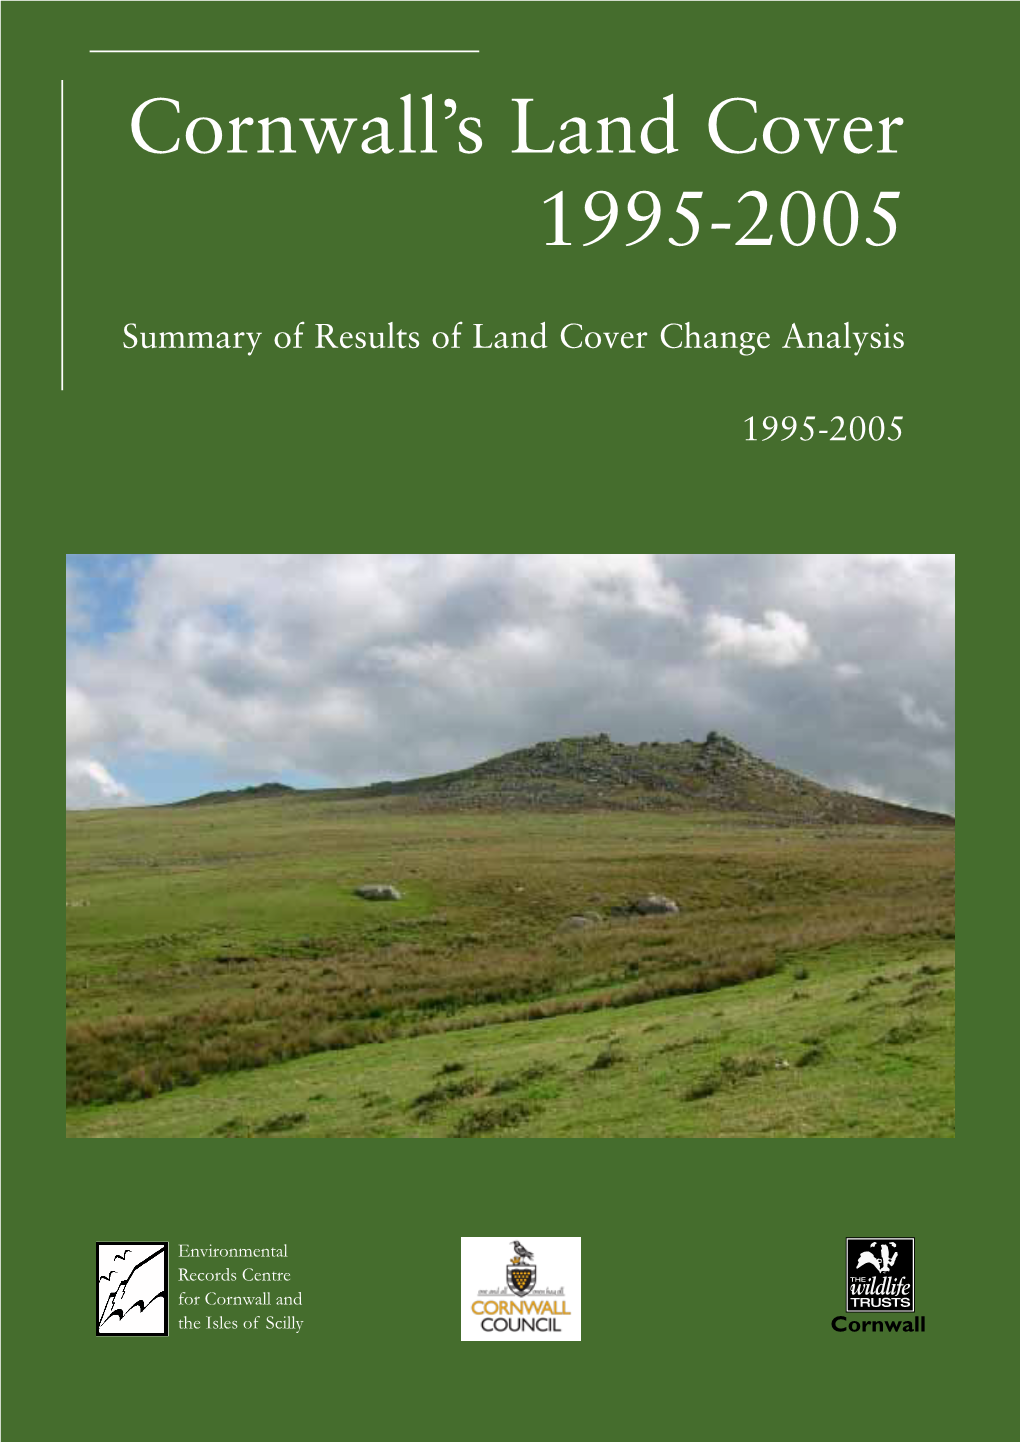 Cornwall's Land Cover 1995-2005: Summary Report